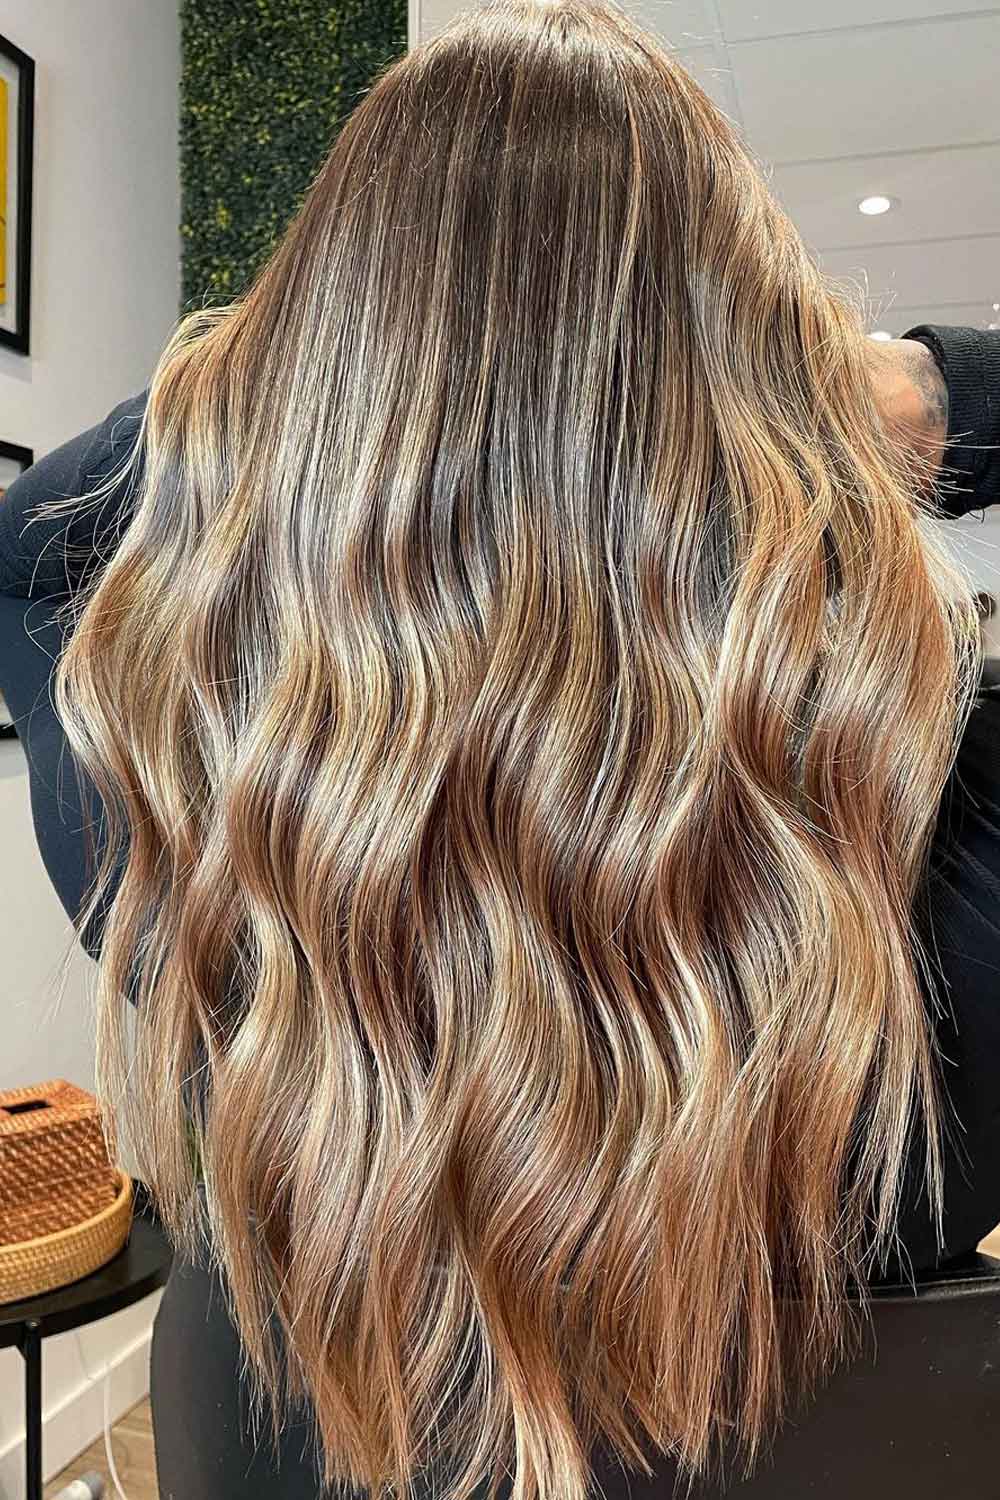 Long Brunette Hair with Balayage